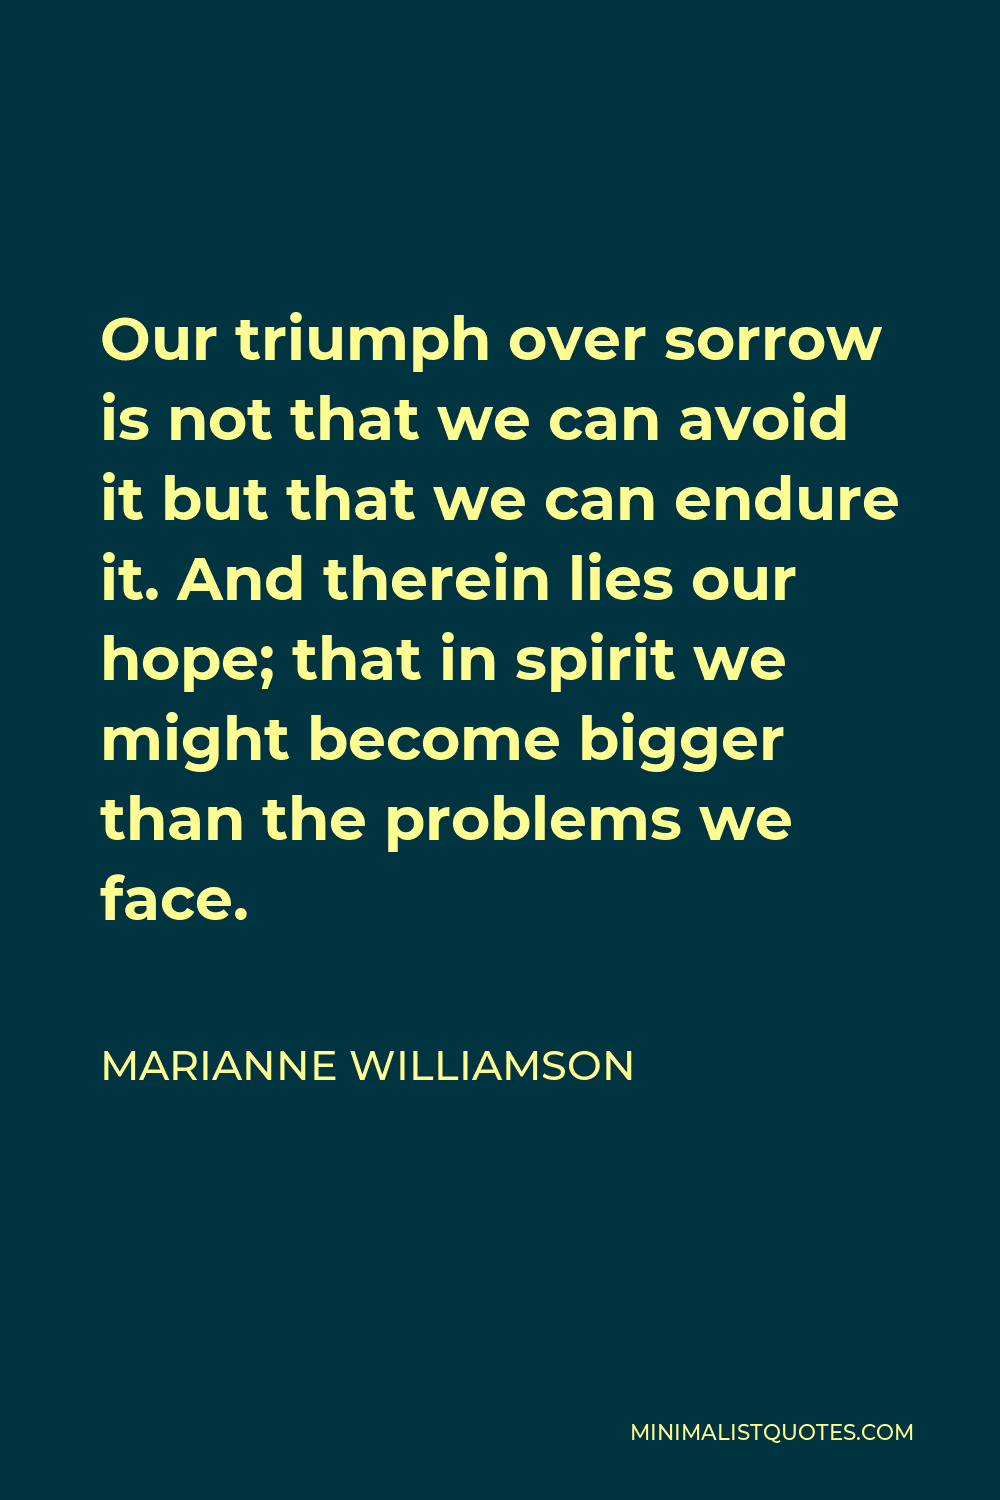 Marianne Williamson Quote - Our triumph over sorrow is not that we can avoid it but that we can endure it. And therein lies our hope; that in spirit we might become bigger than the problems we face.